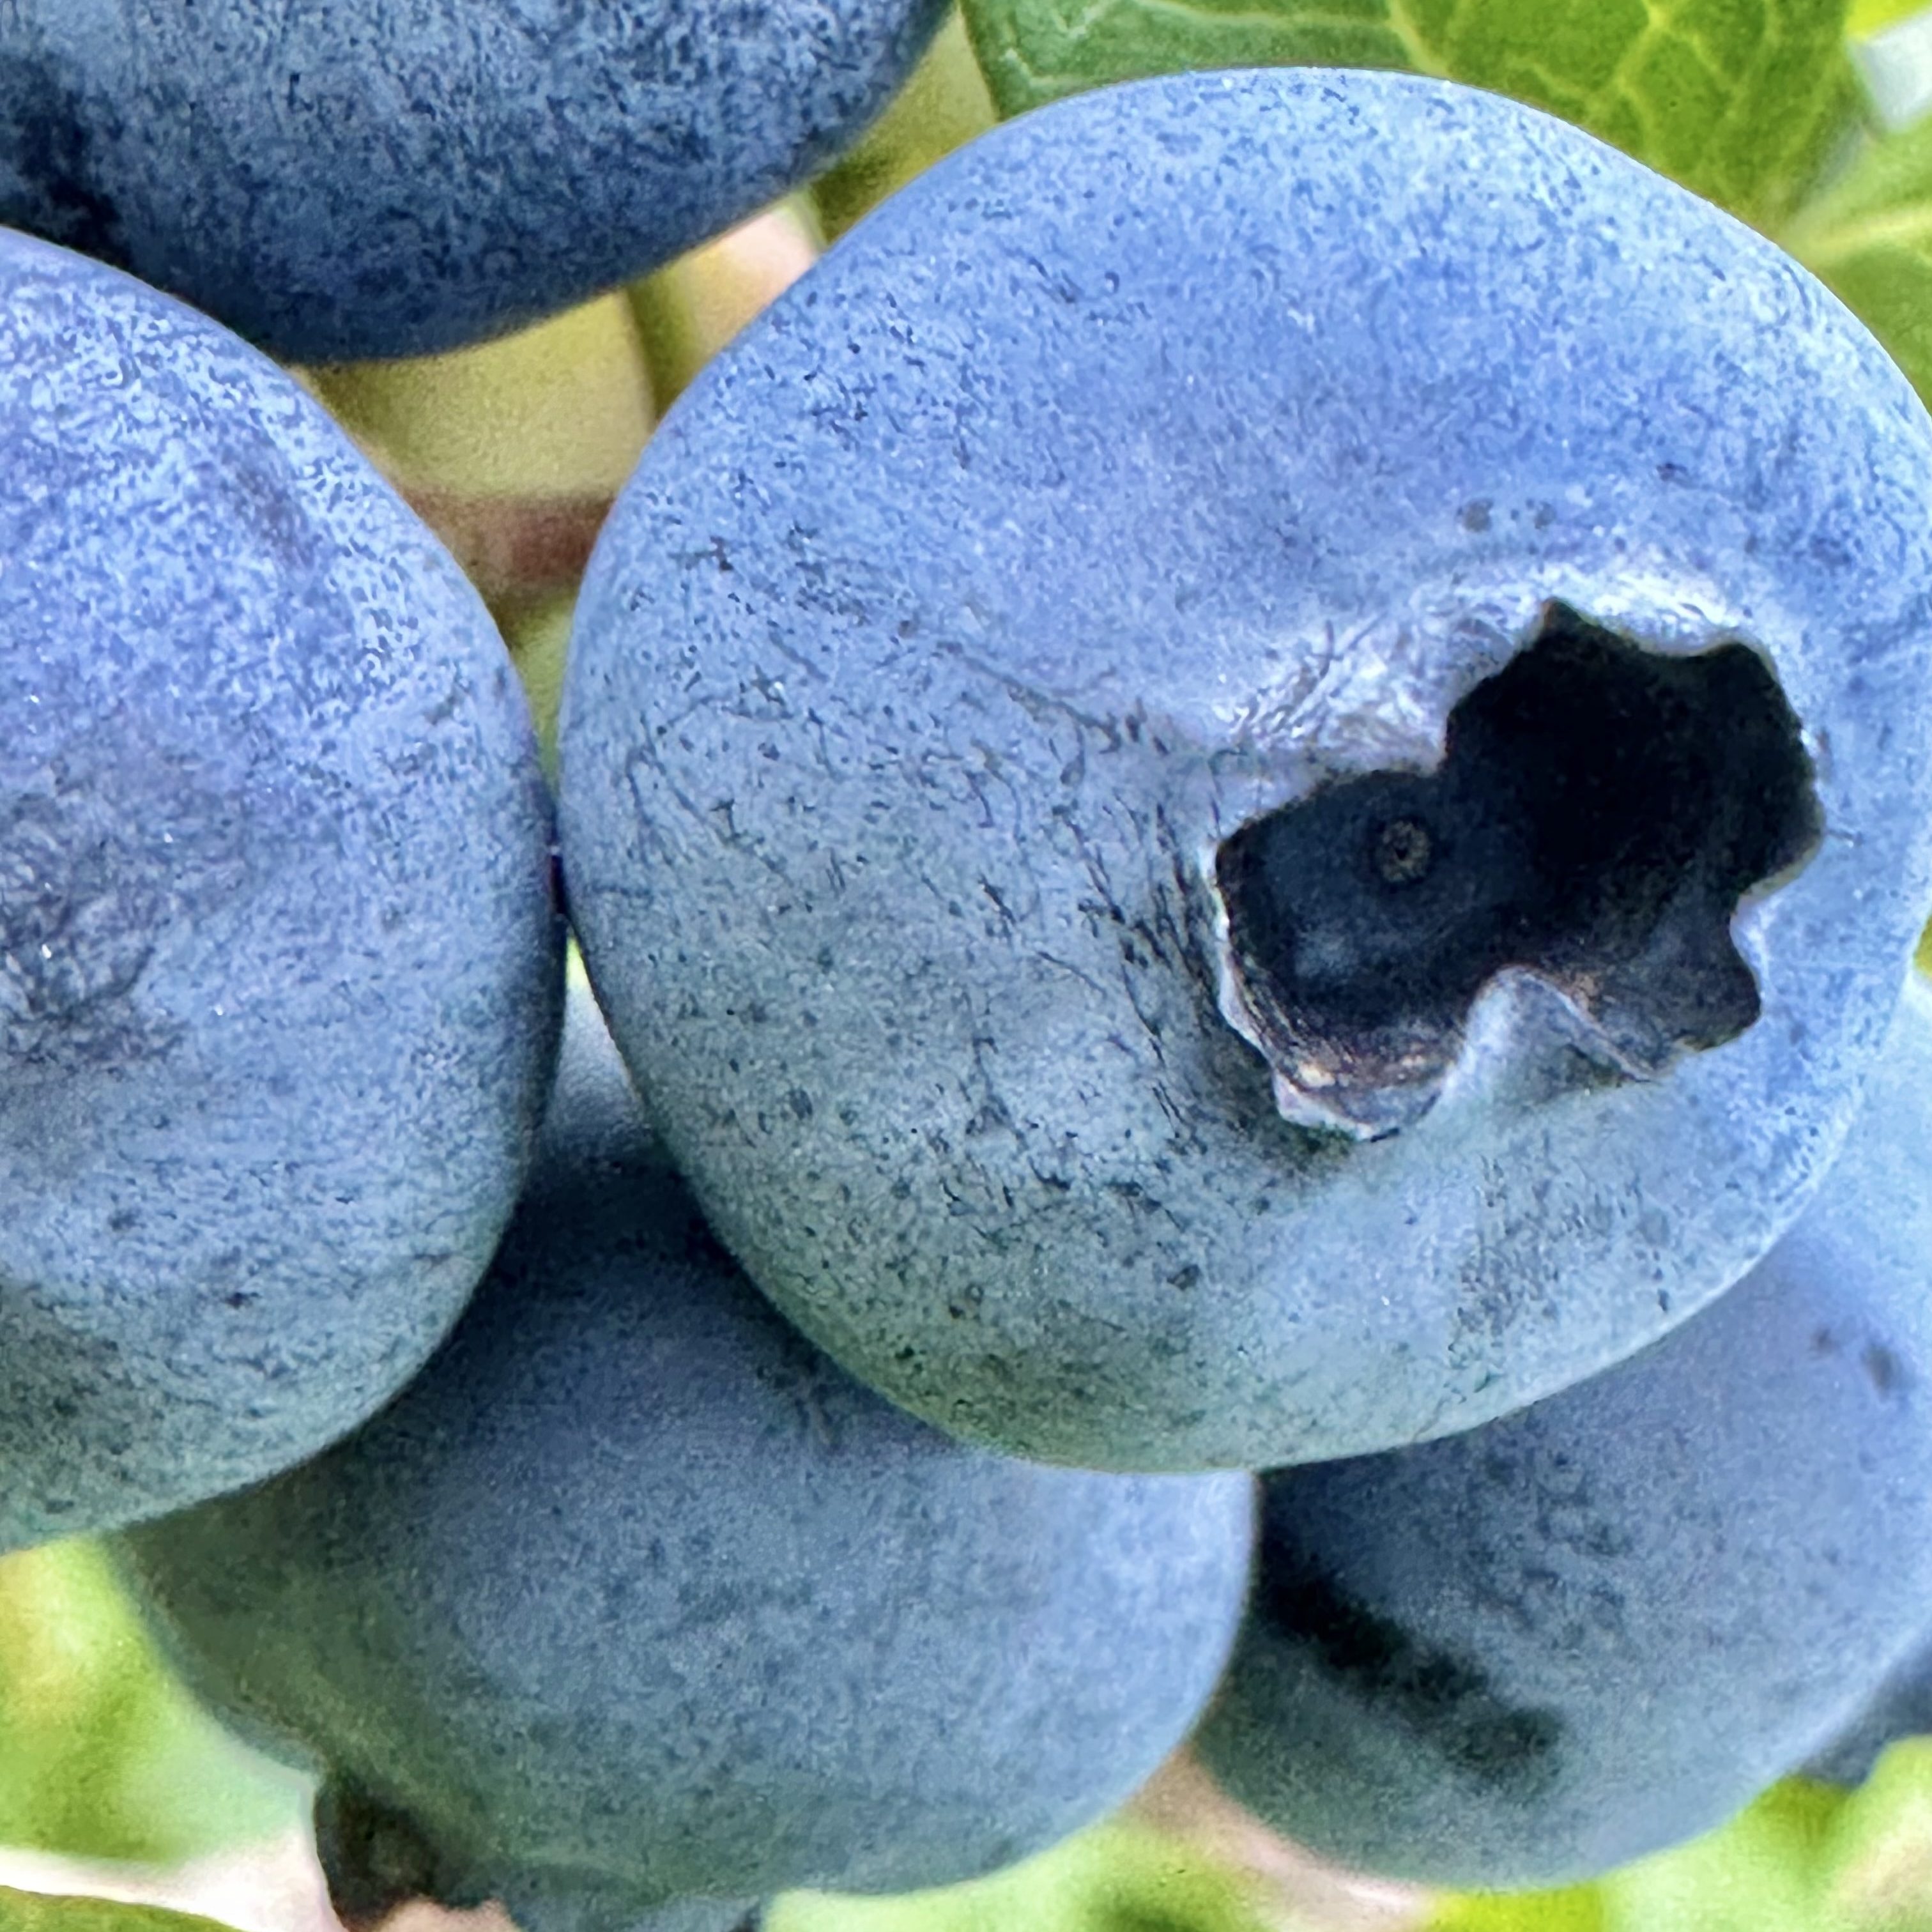 Gigantic Maine blueberry from bluberry picking in southern Maine at Estes Berry Farm